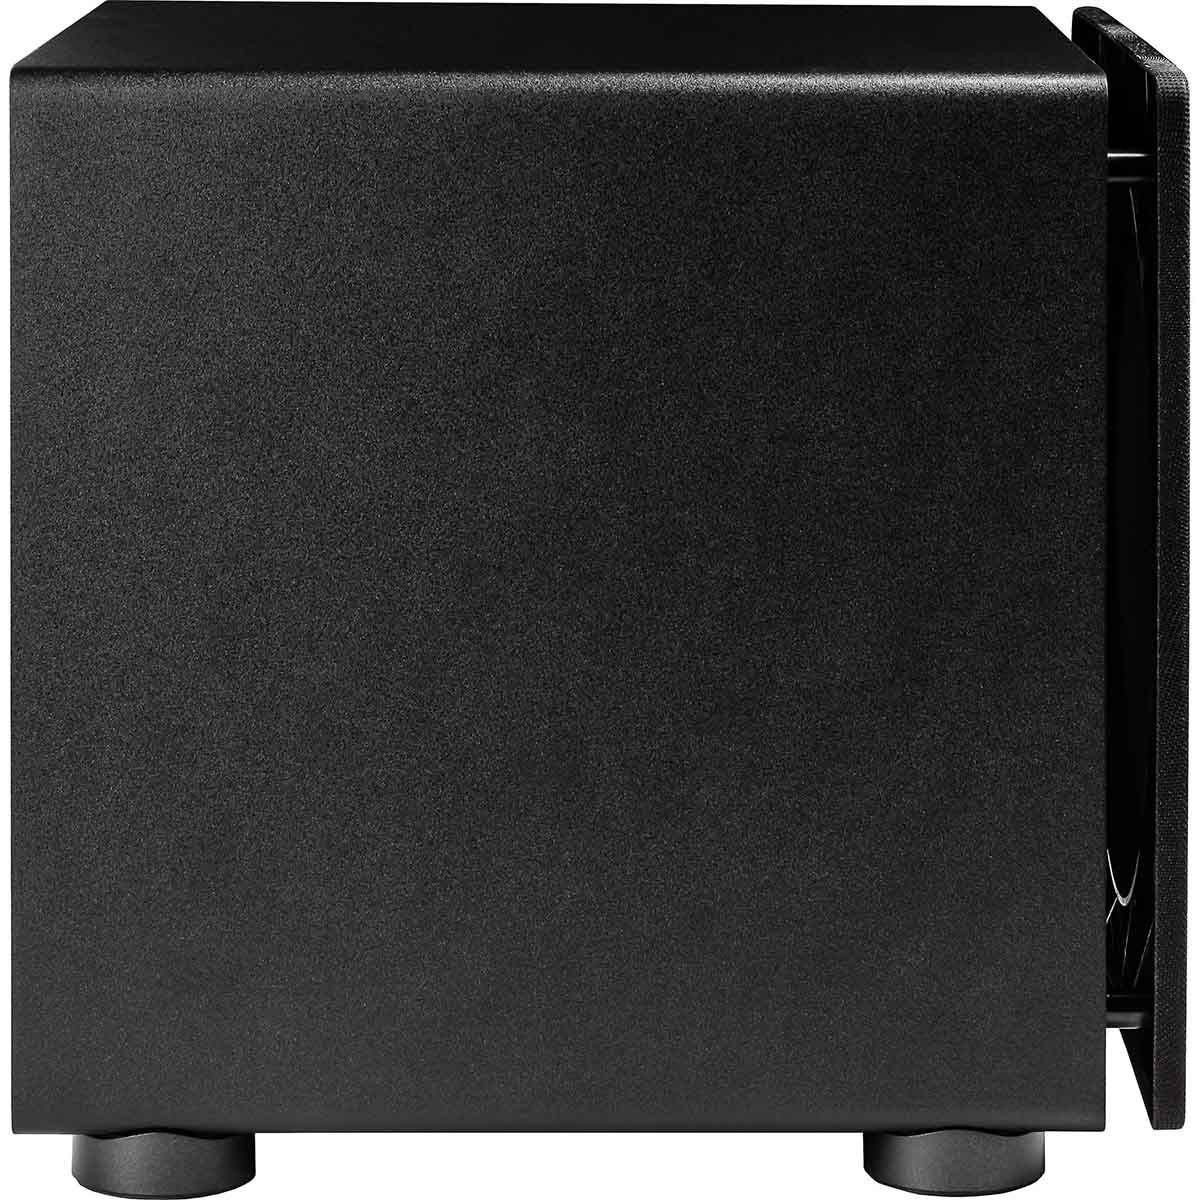 ELAC PS350 Side View Covered in Black Ask